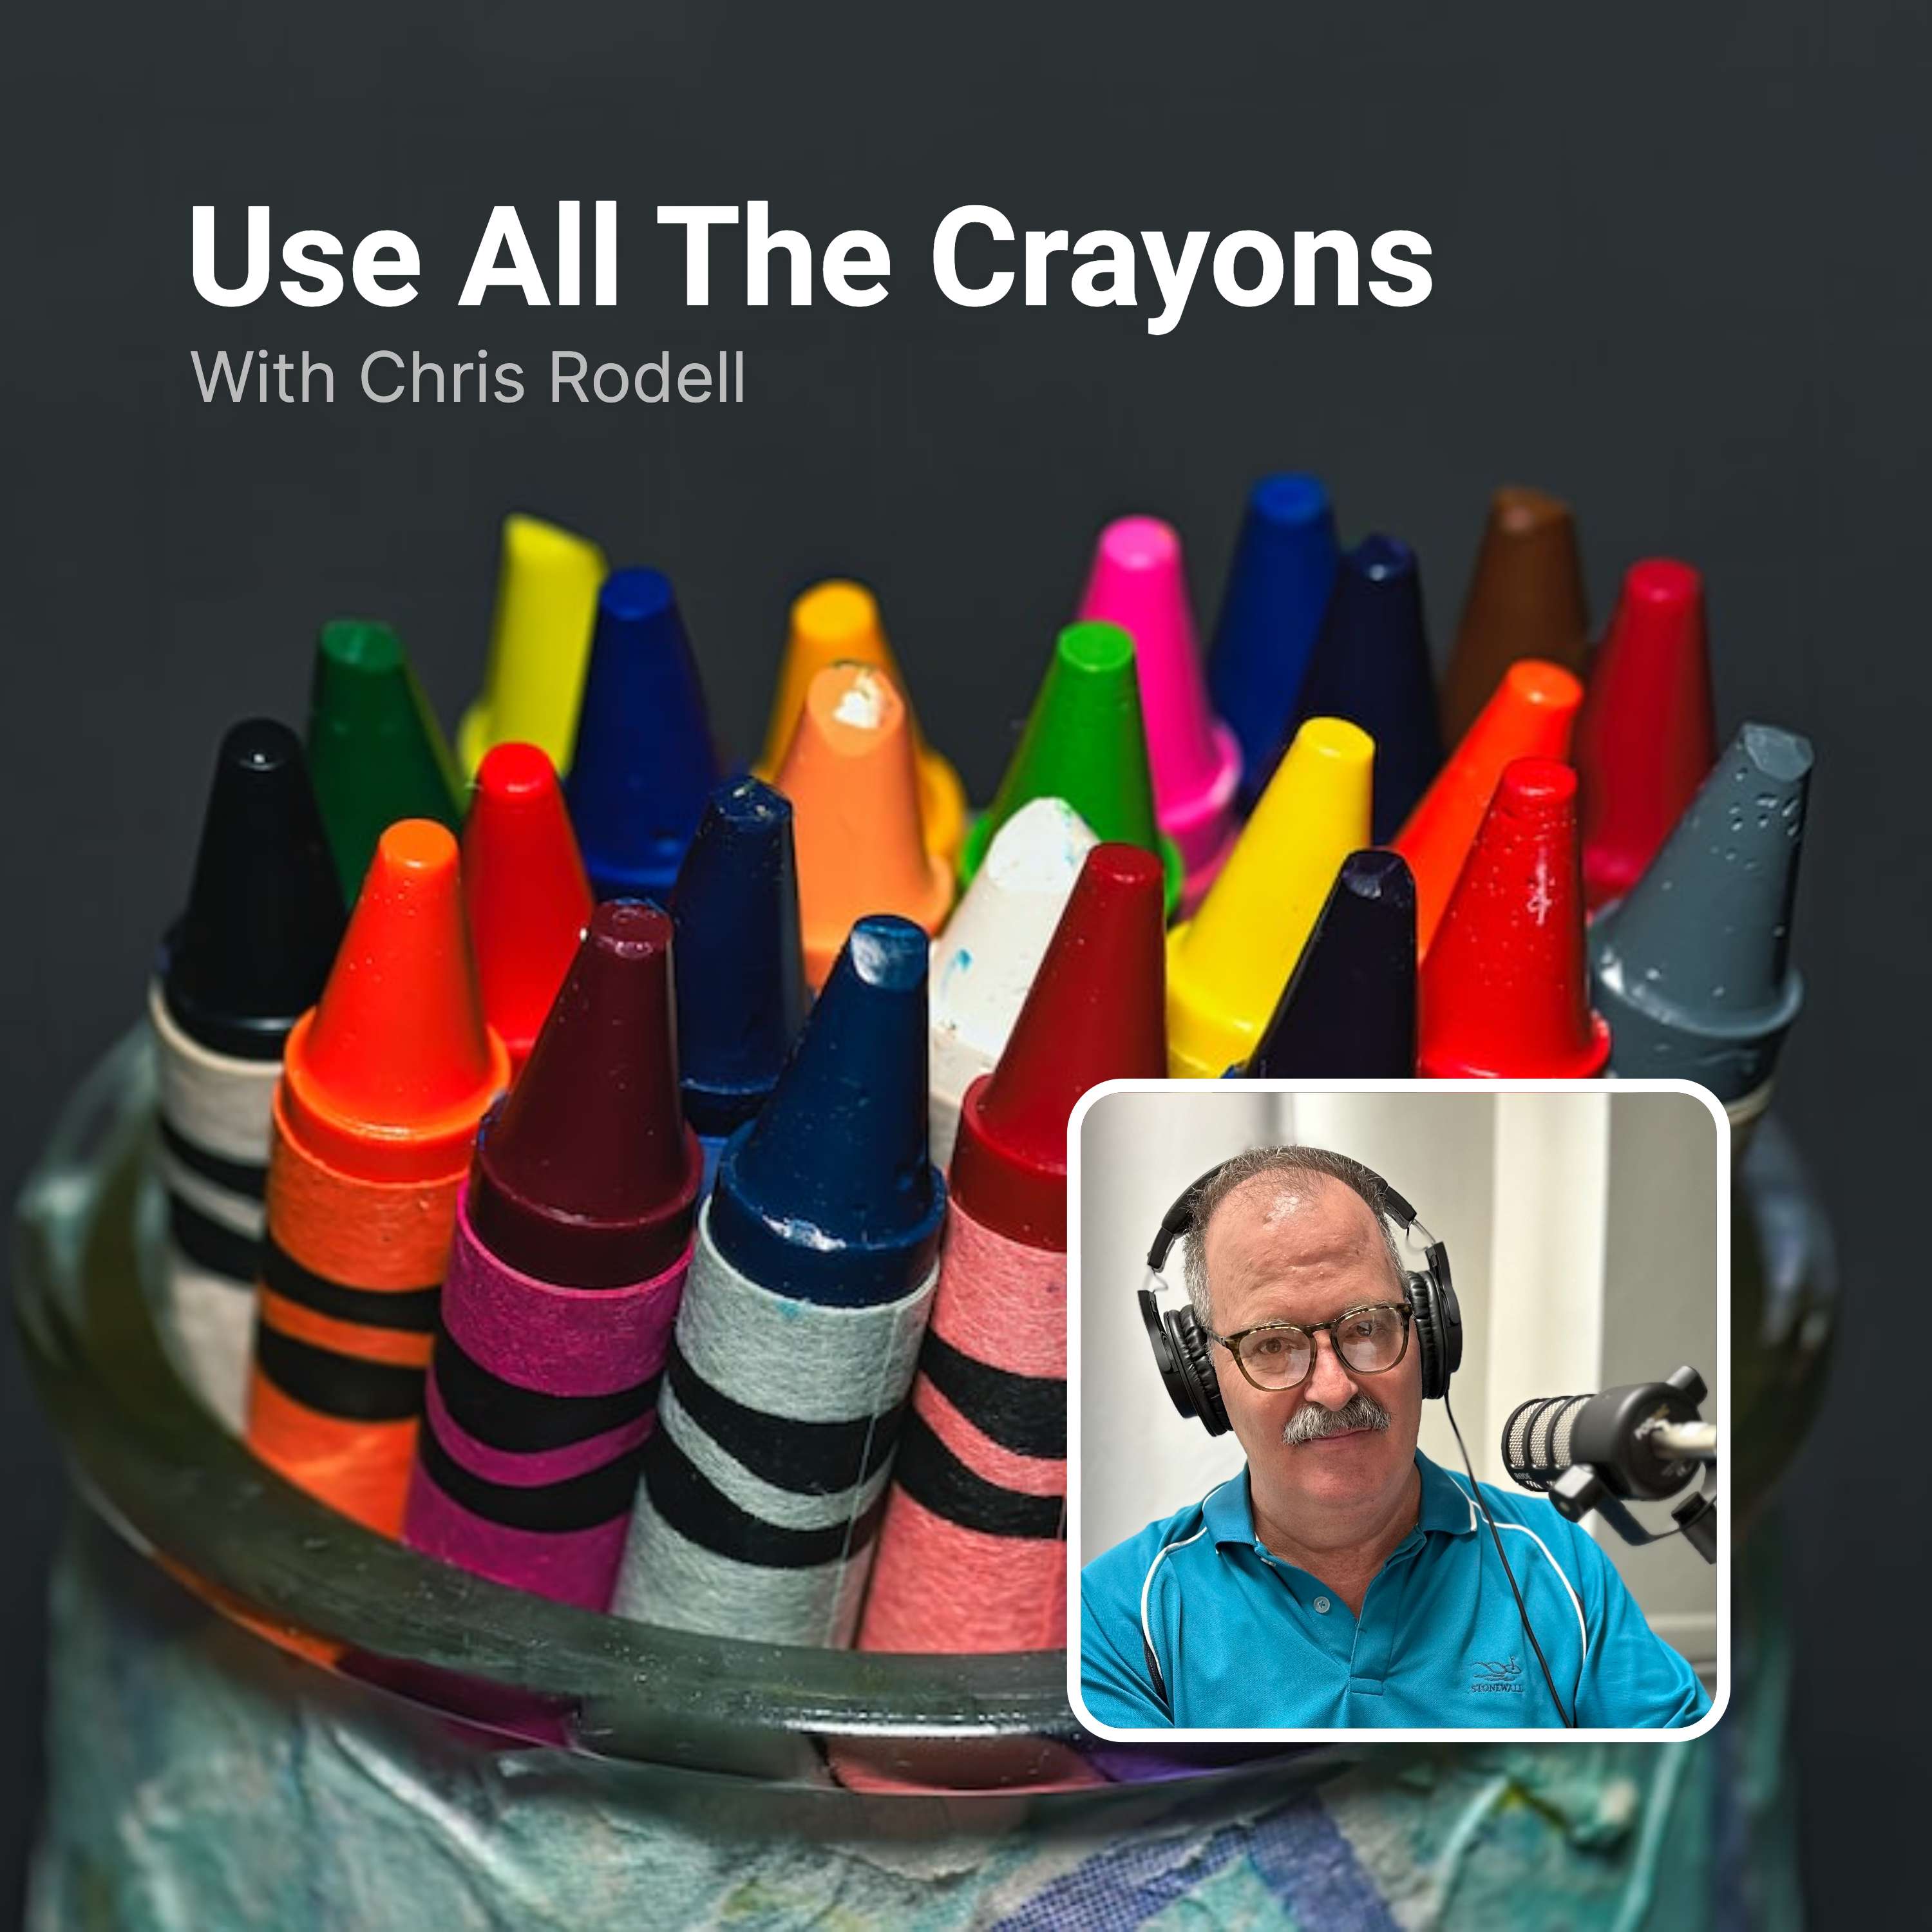 Trailer - Use All The Crayons with Chris Rodell